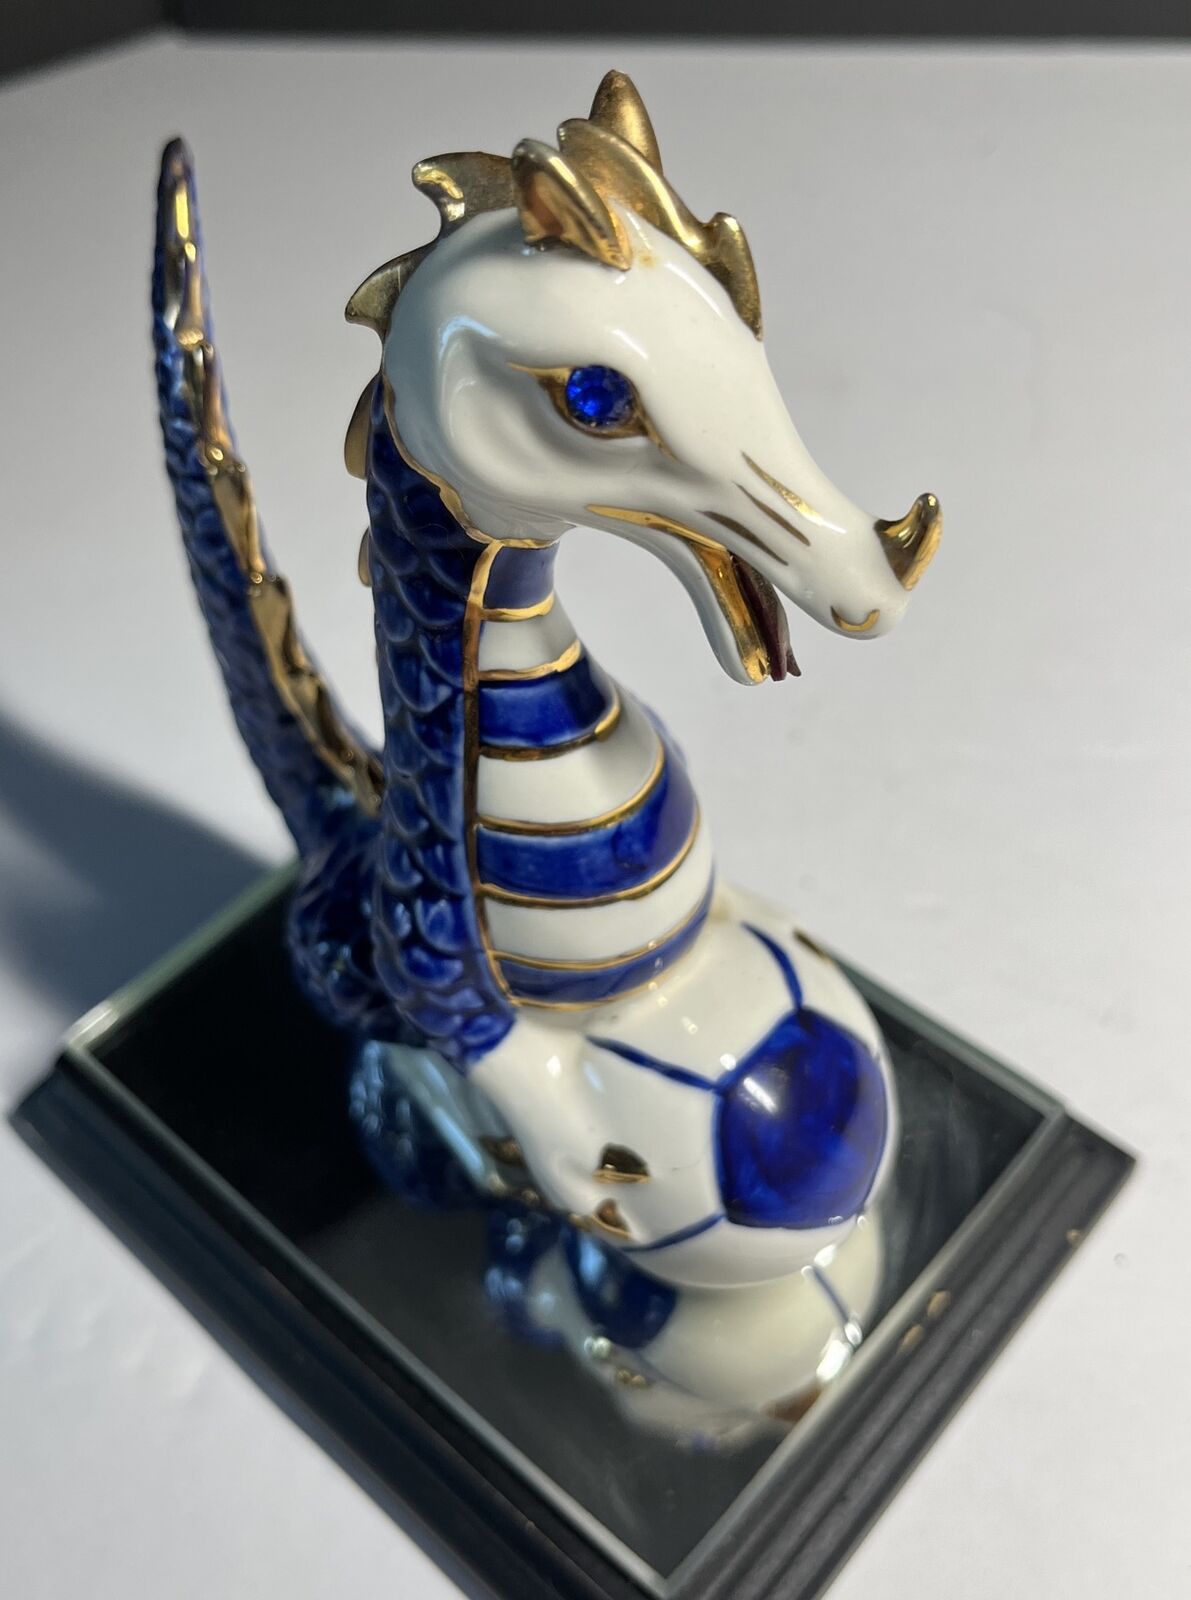 Artisan-Crafted Porcelain Dragon Gold Blue White Striped Soccer Ball Football UK